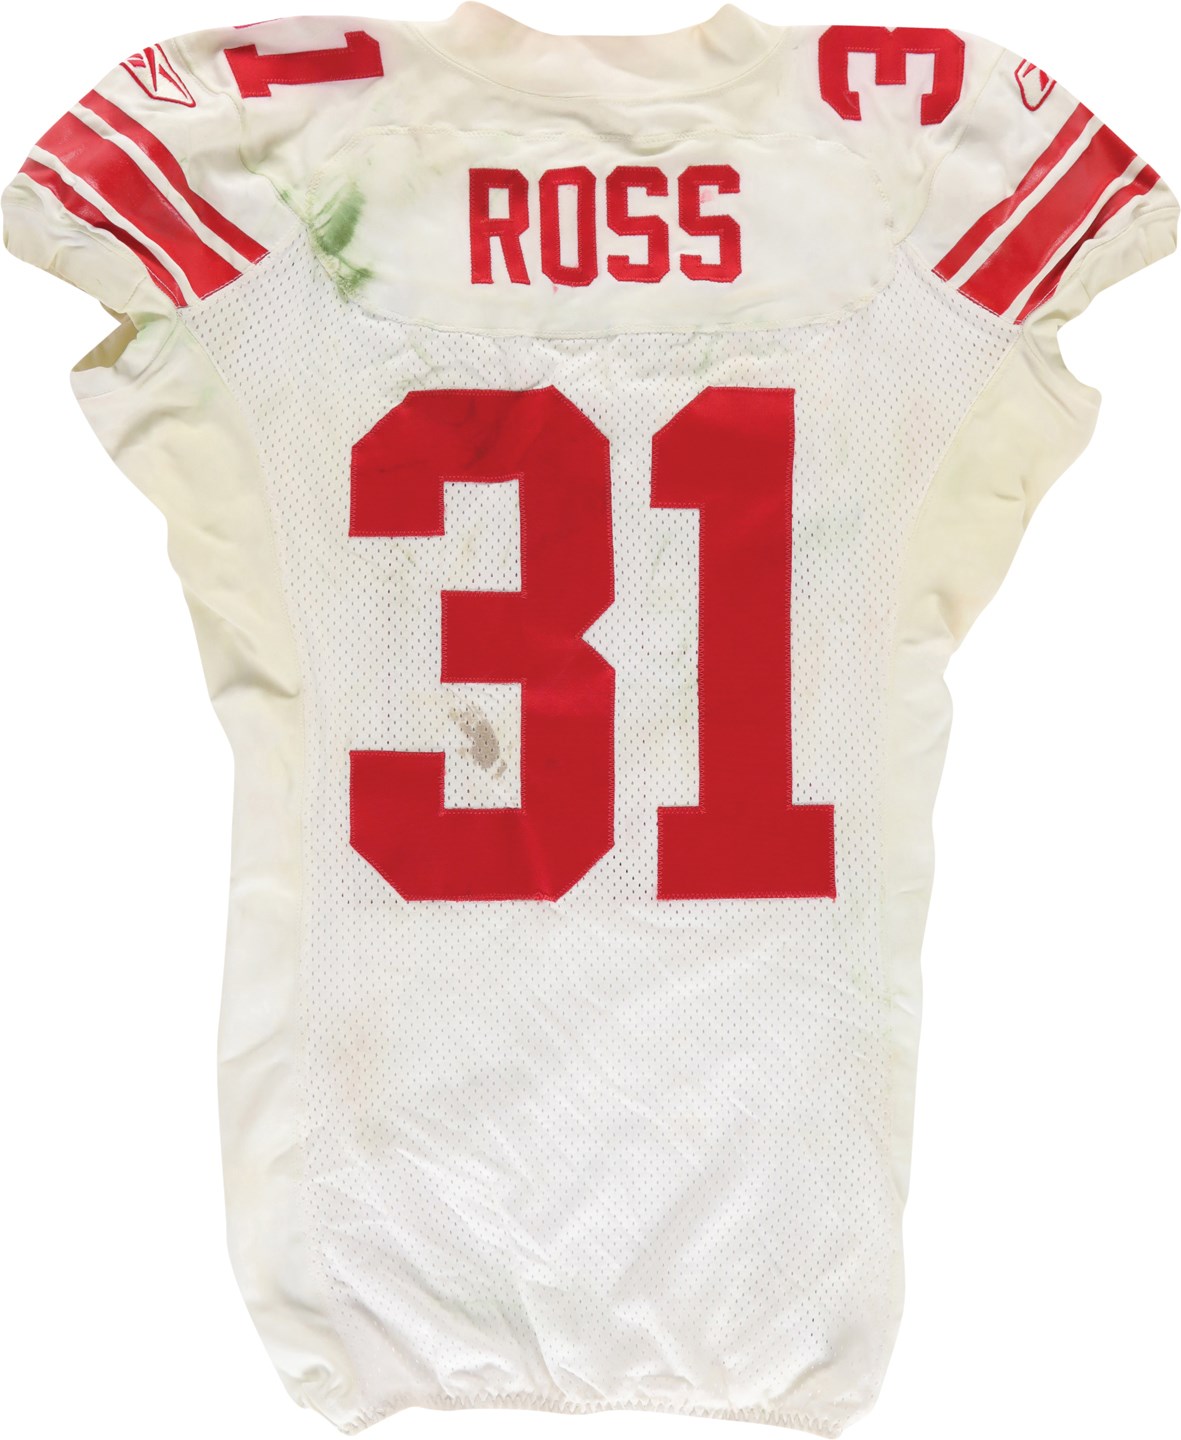 2008 Aaron Ross Super Bowl XLII New York Giants Game Worn Jersey (Photo-Matched)